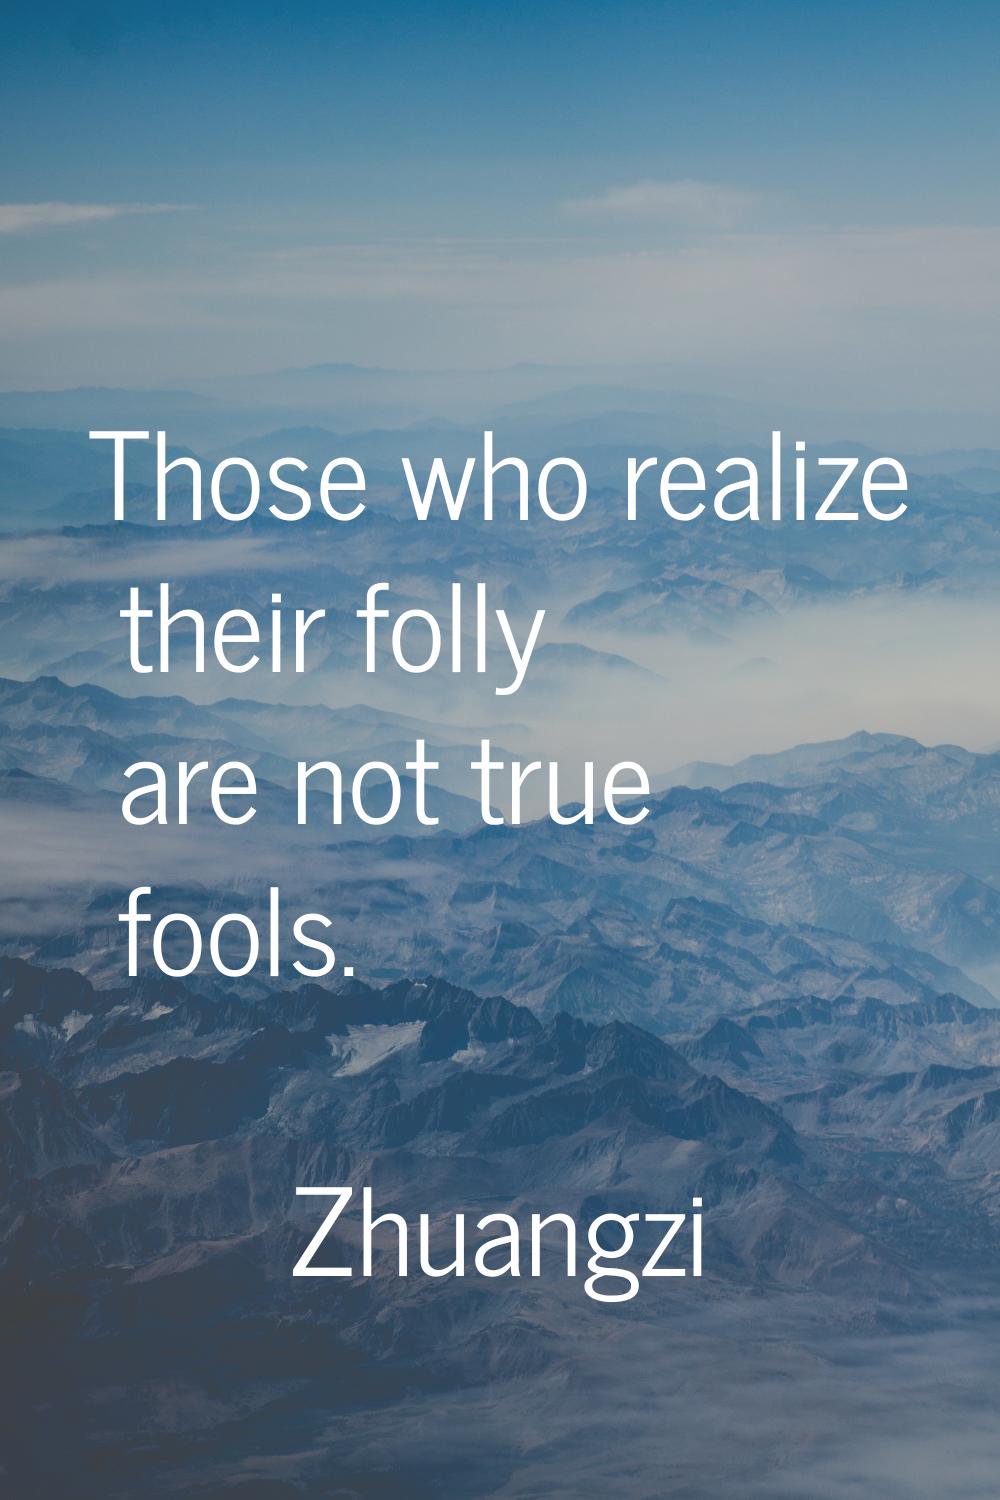 Those who realize their folly are not true fools.